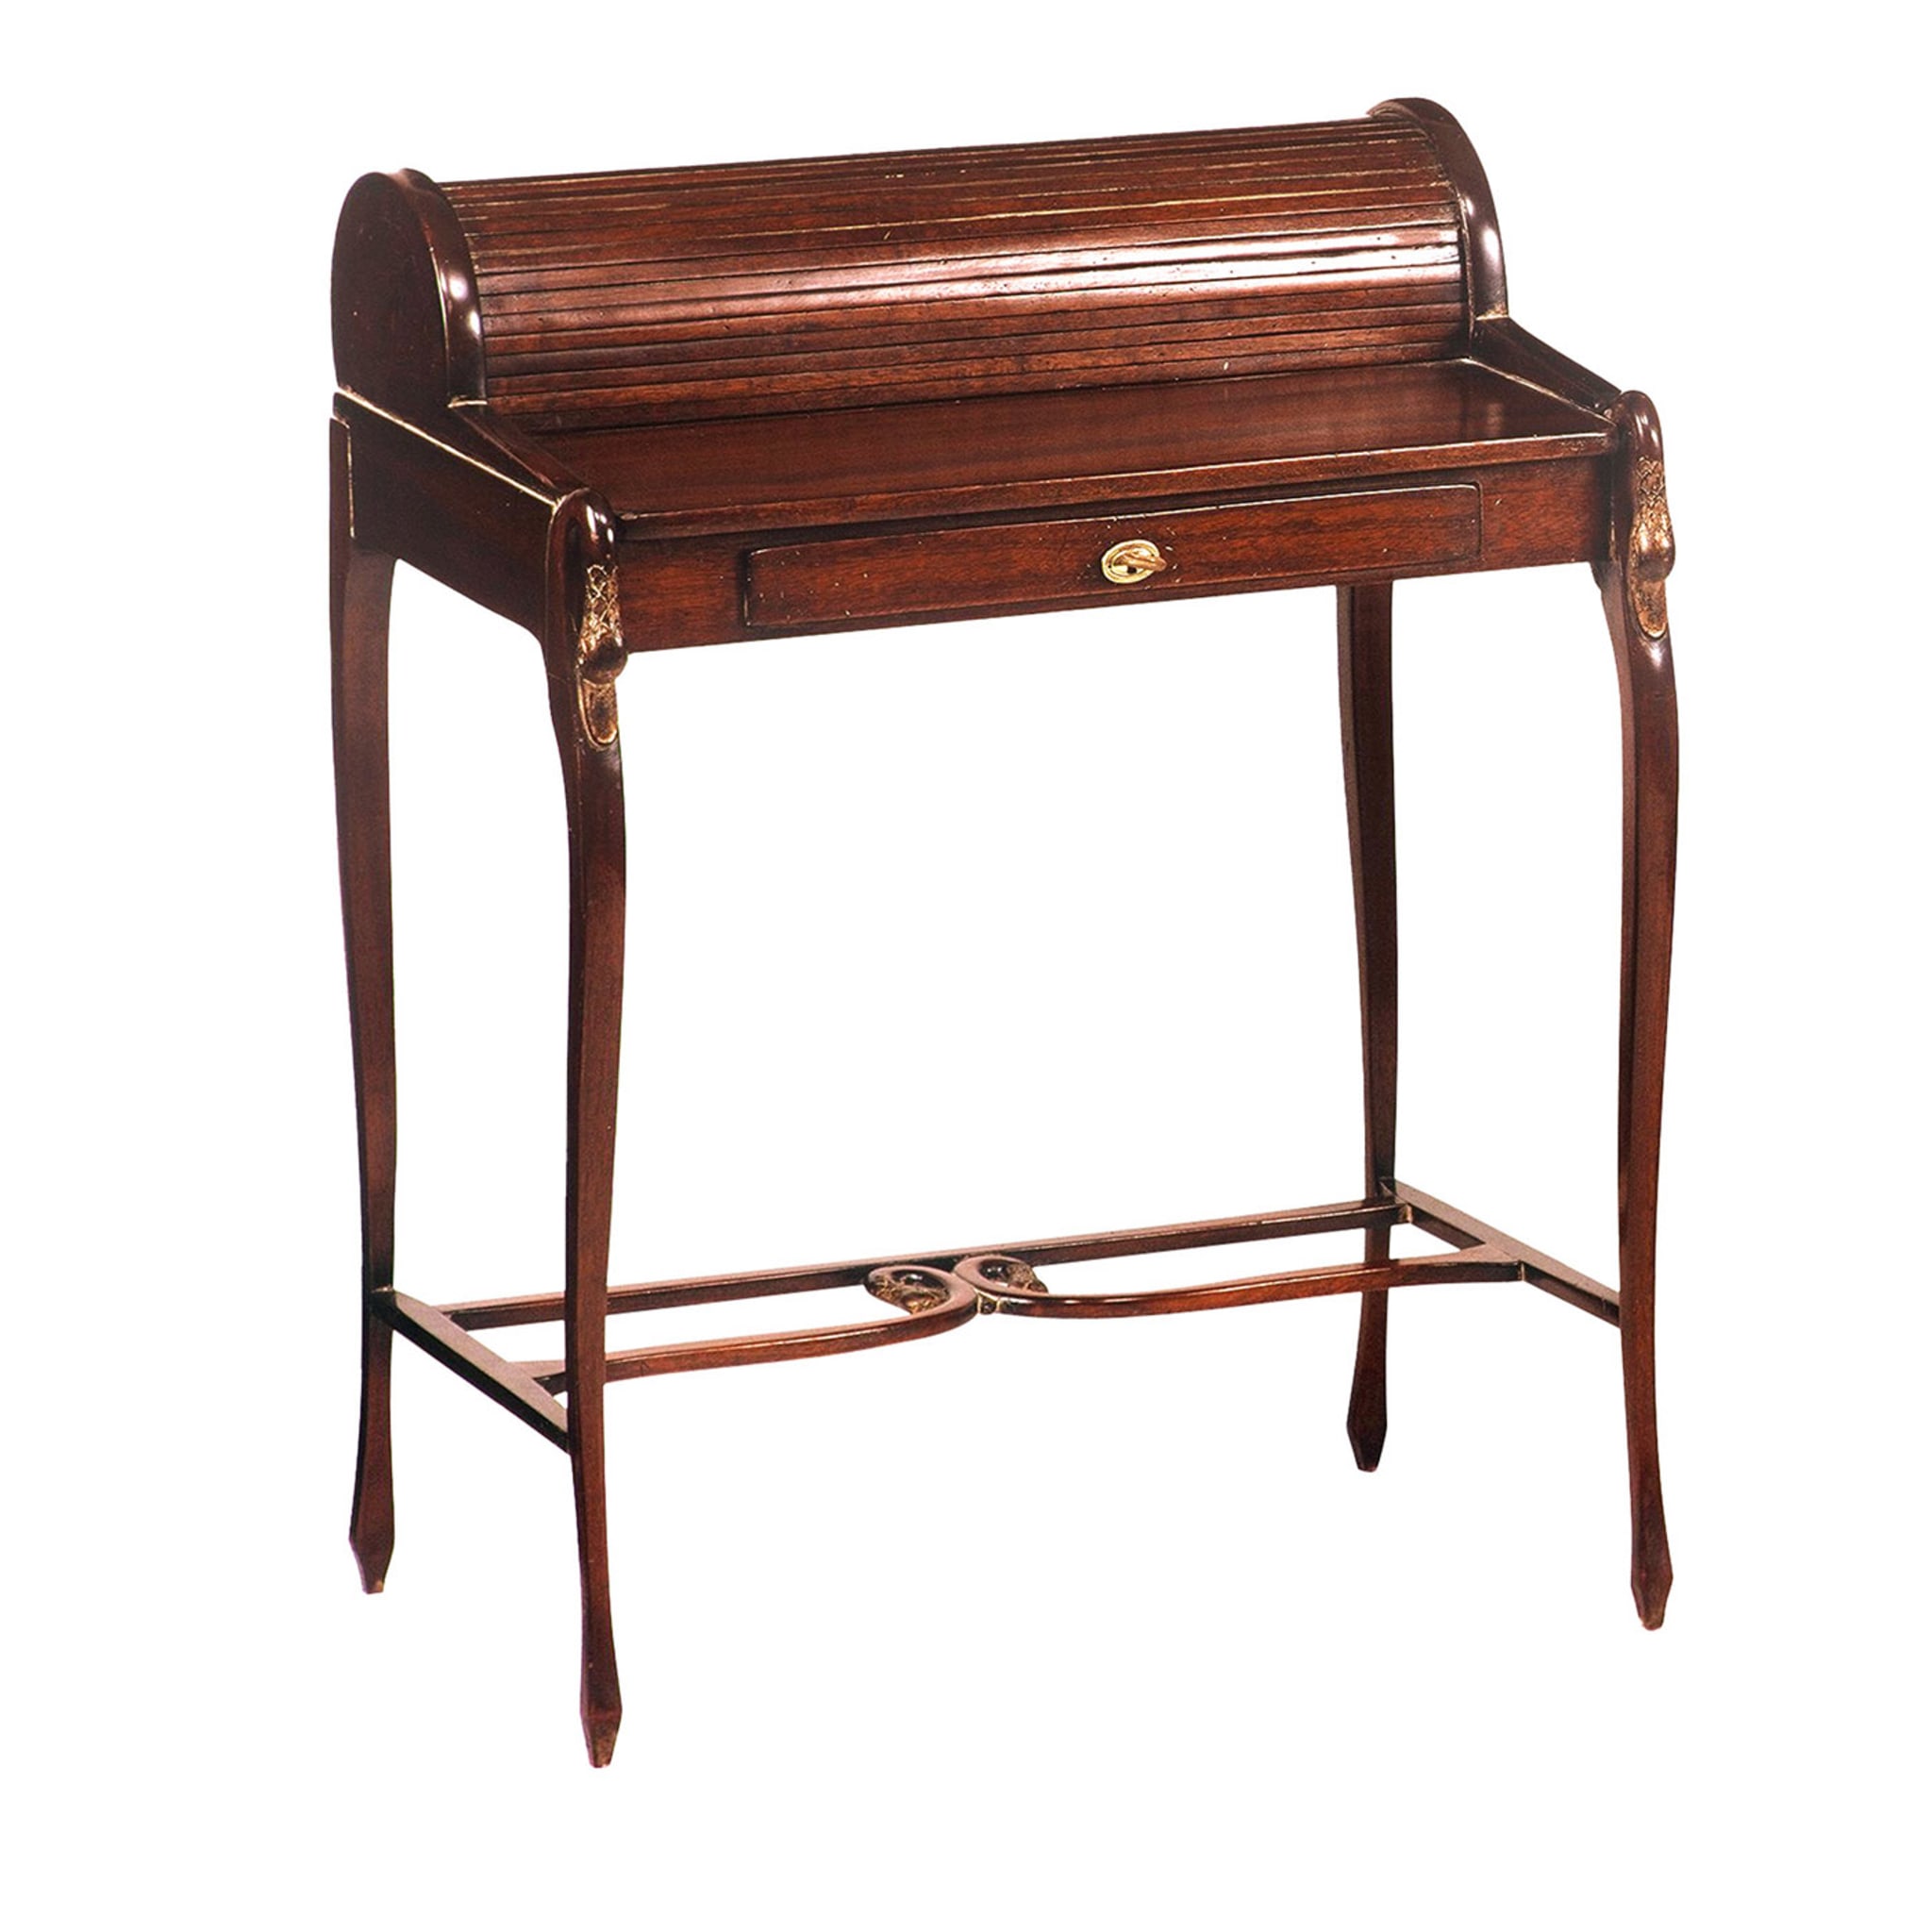 French Empire-Style Roll-Top Mahogany Writing Desk - Main view